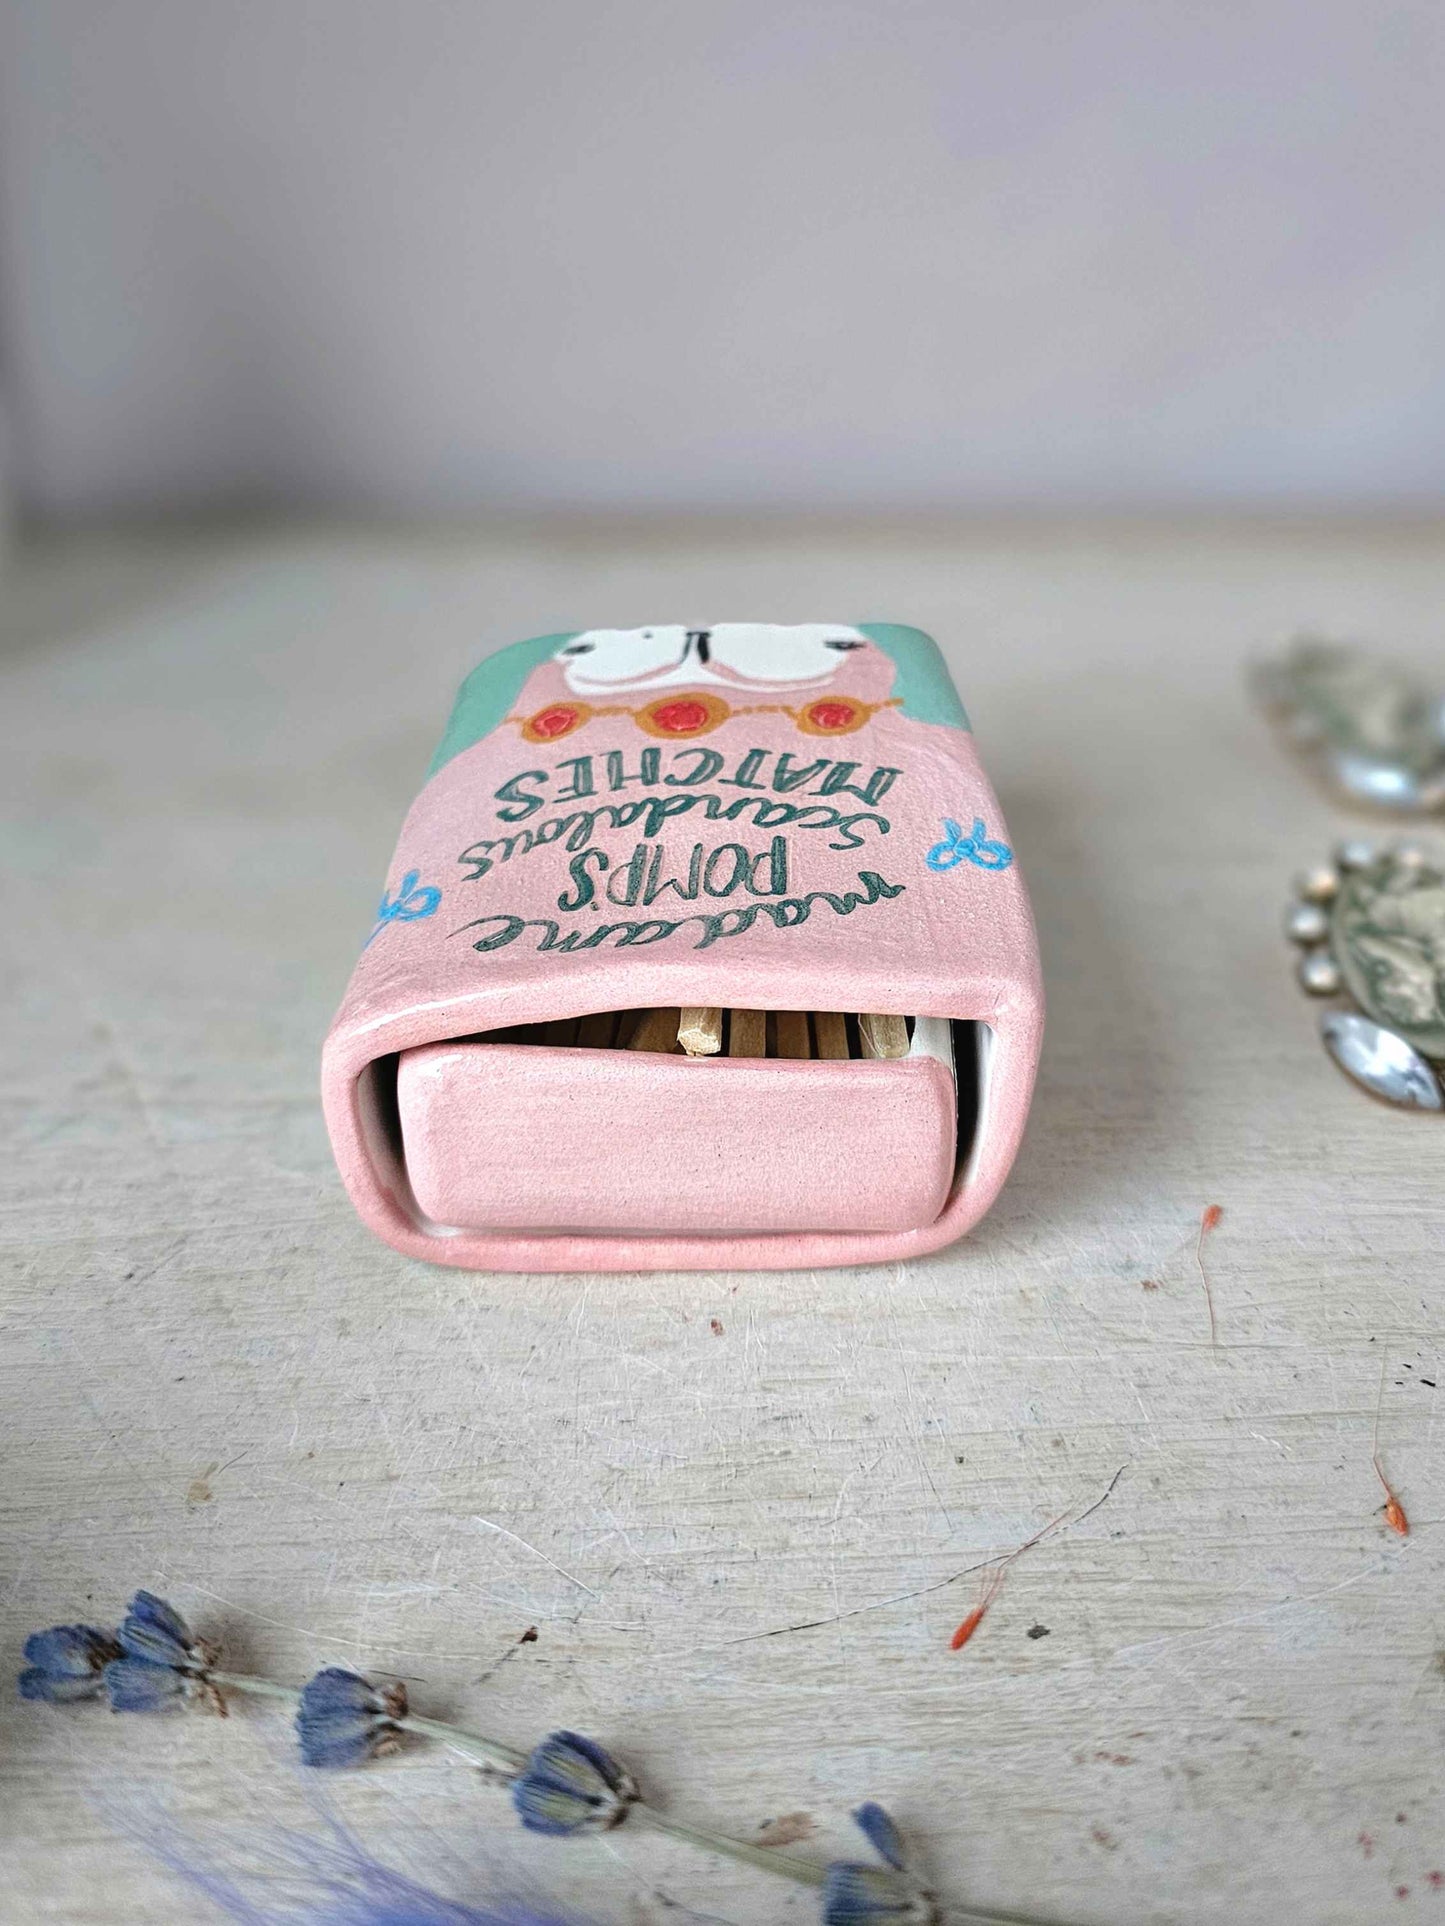 Made to order: Madame Pomp's Scandalous matches small ceramic matchbox